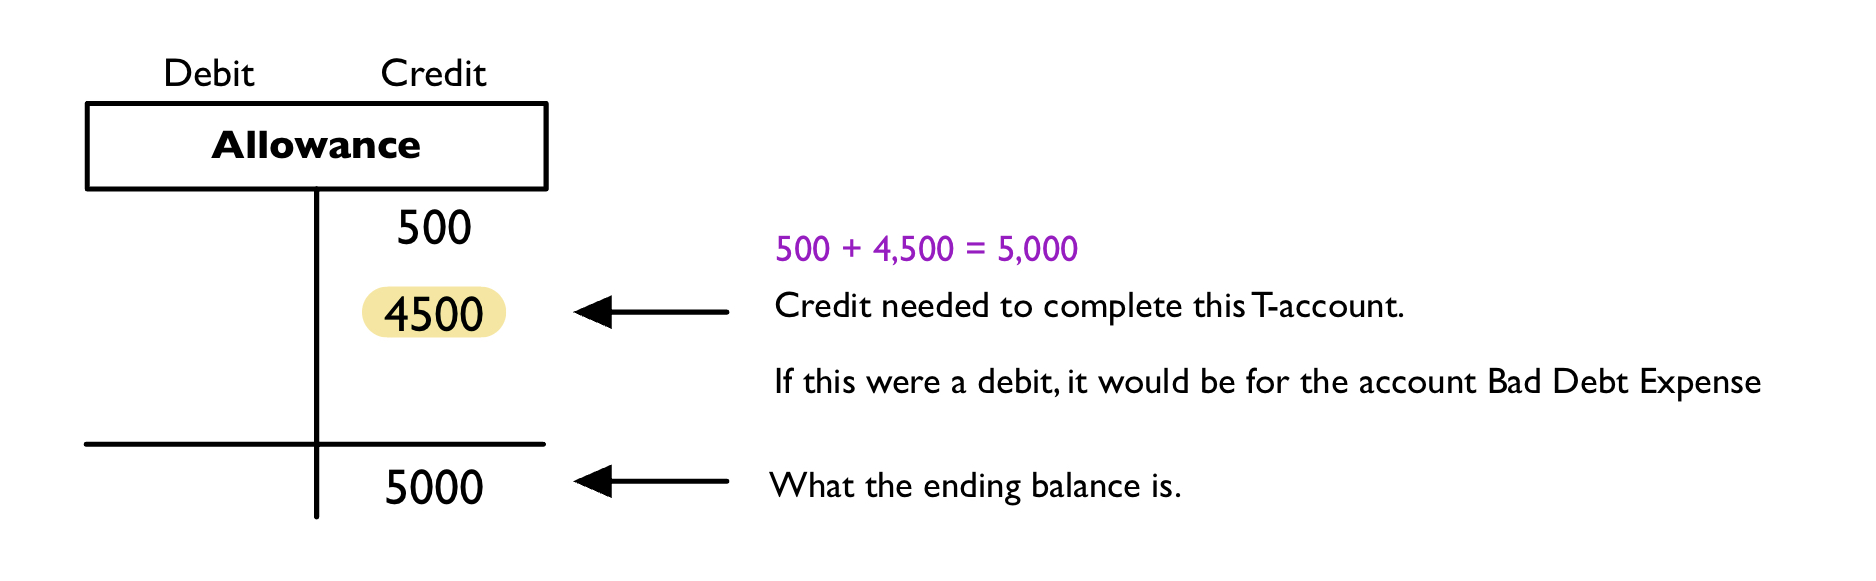 The adjusted entry is a credit of 4500. (Allowance = Allowance for Doubtful Accounts)